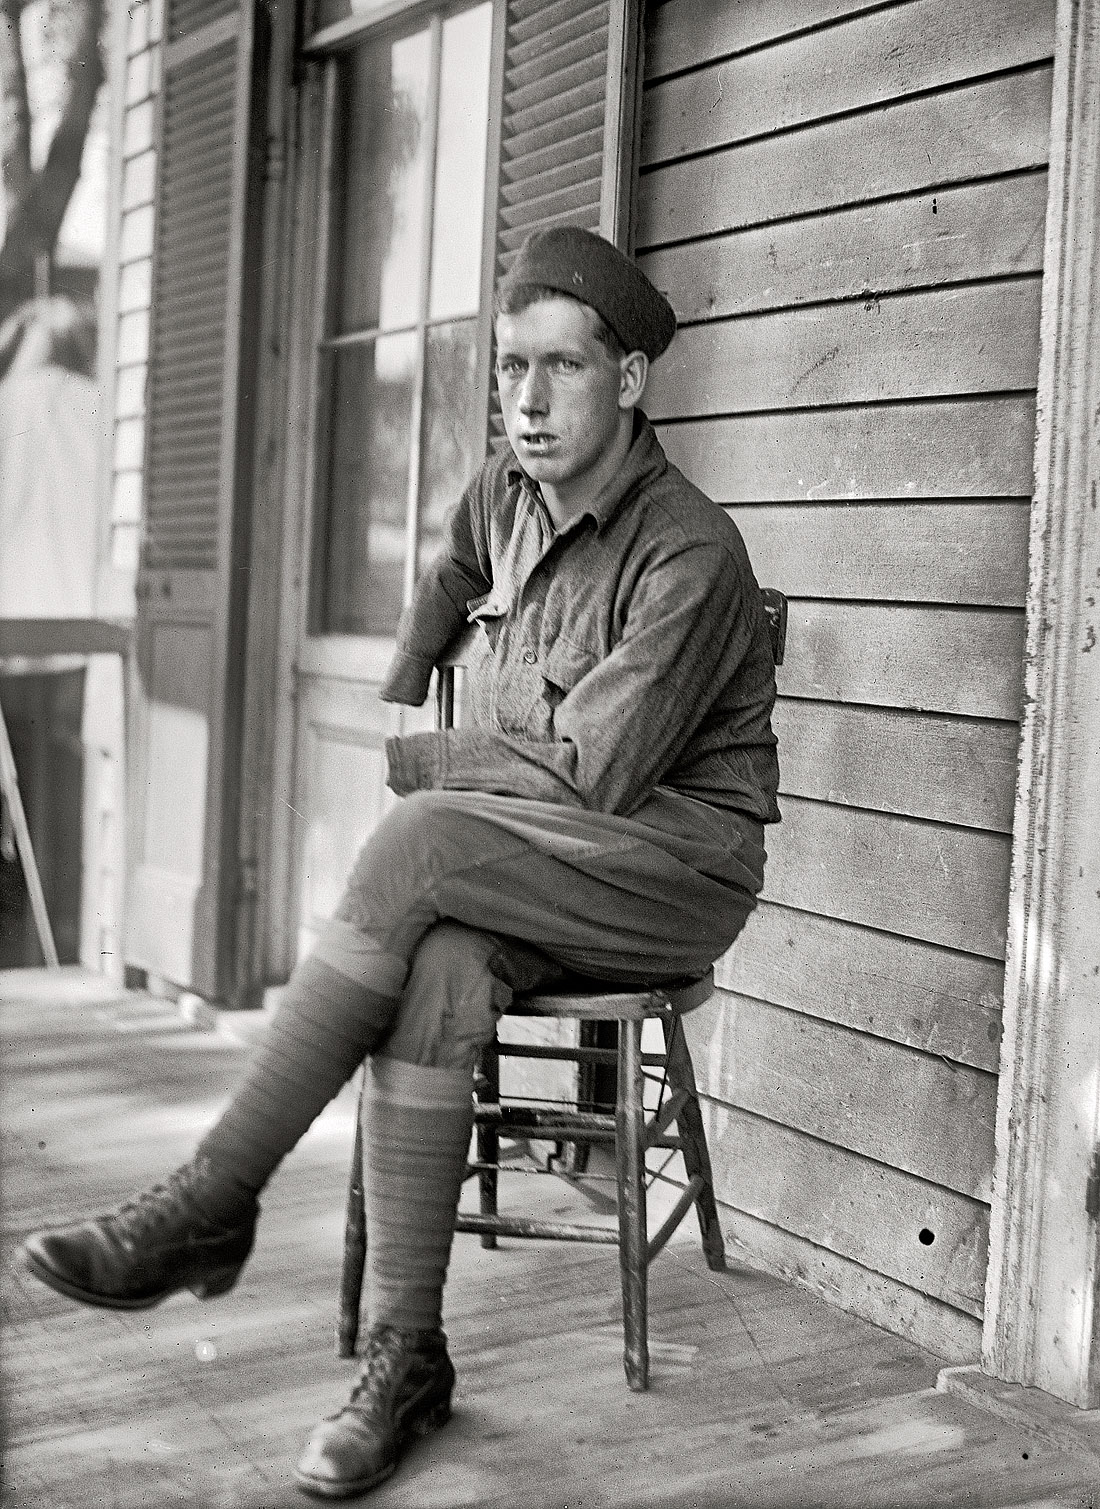 "Walter Reed Hospital, 1918." Harris & Ewing glass negative. View full size.